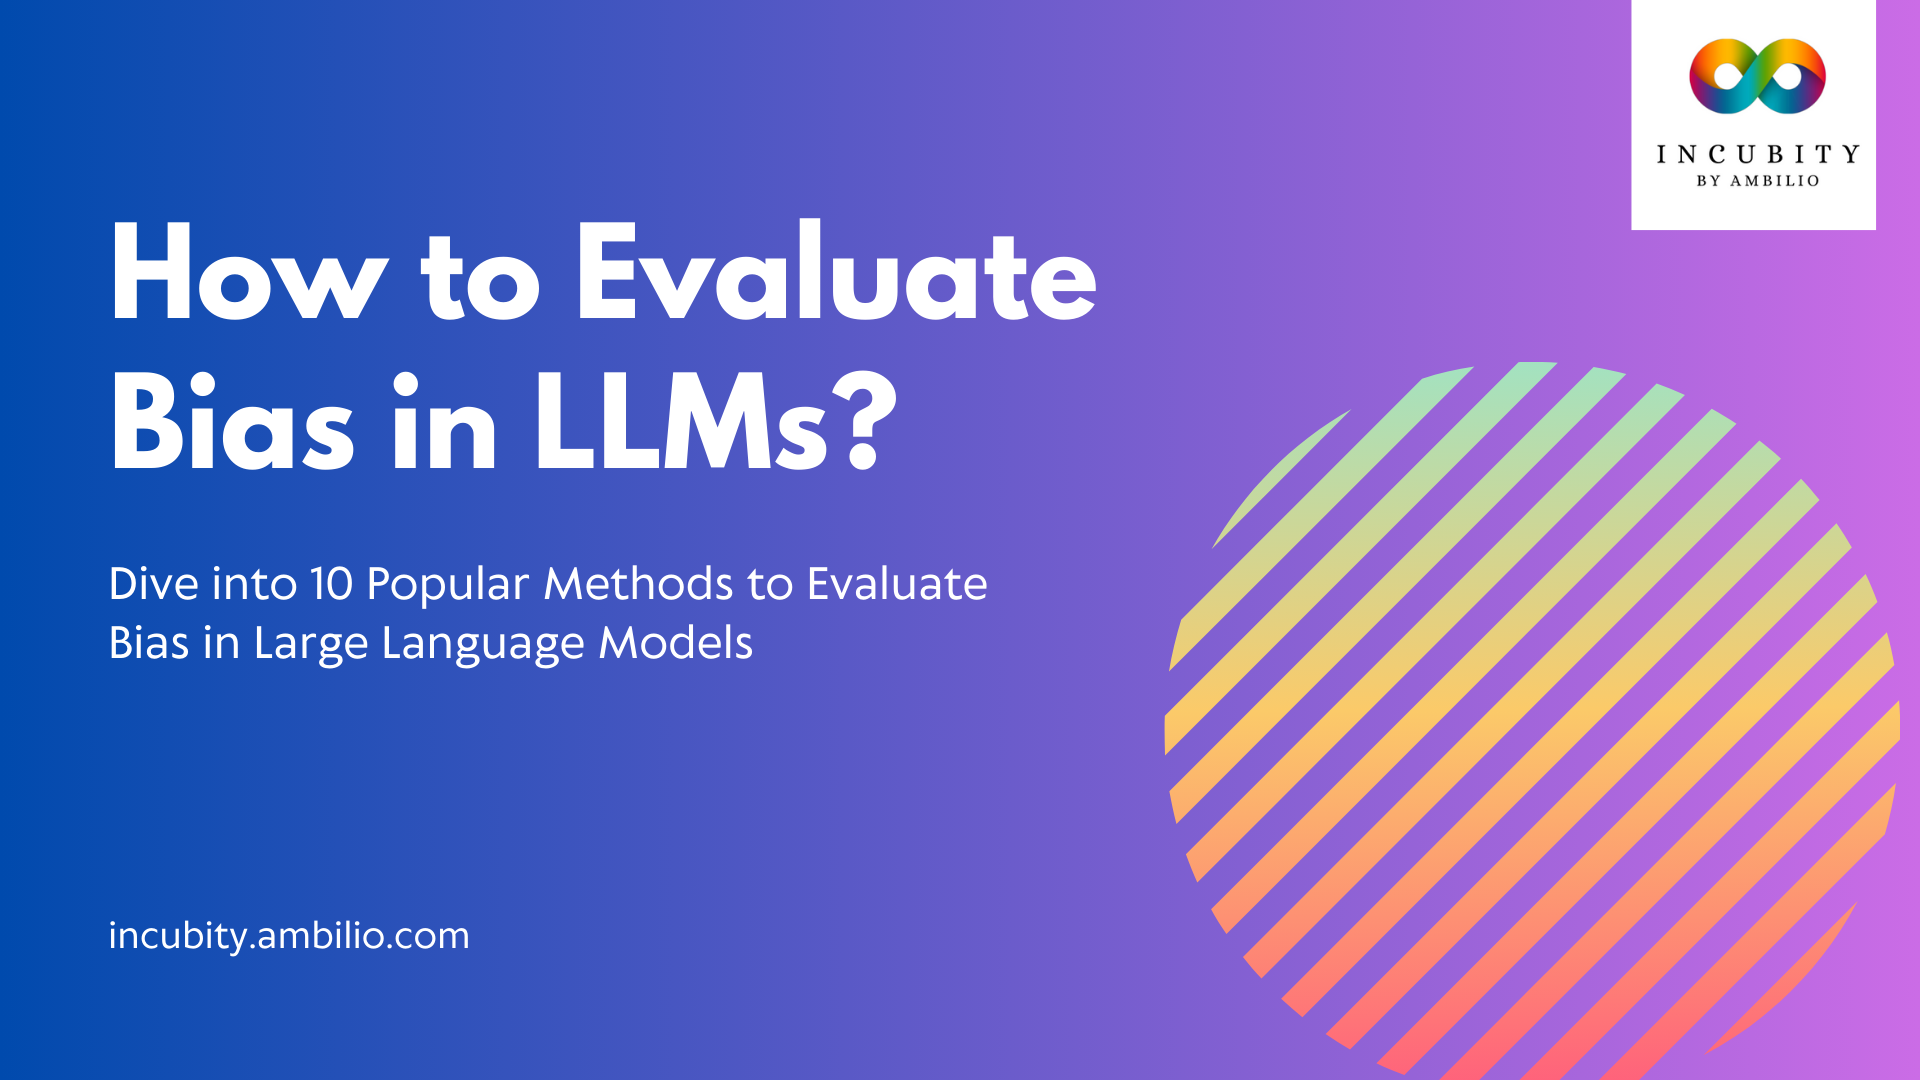 How to Evaluate Bias in LLMs?